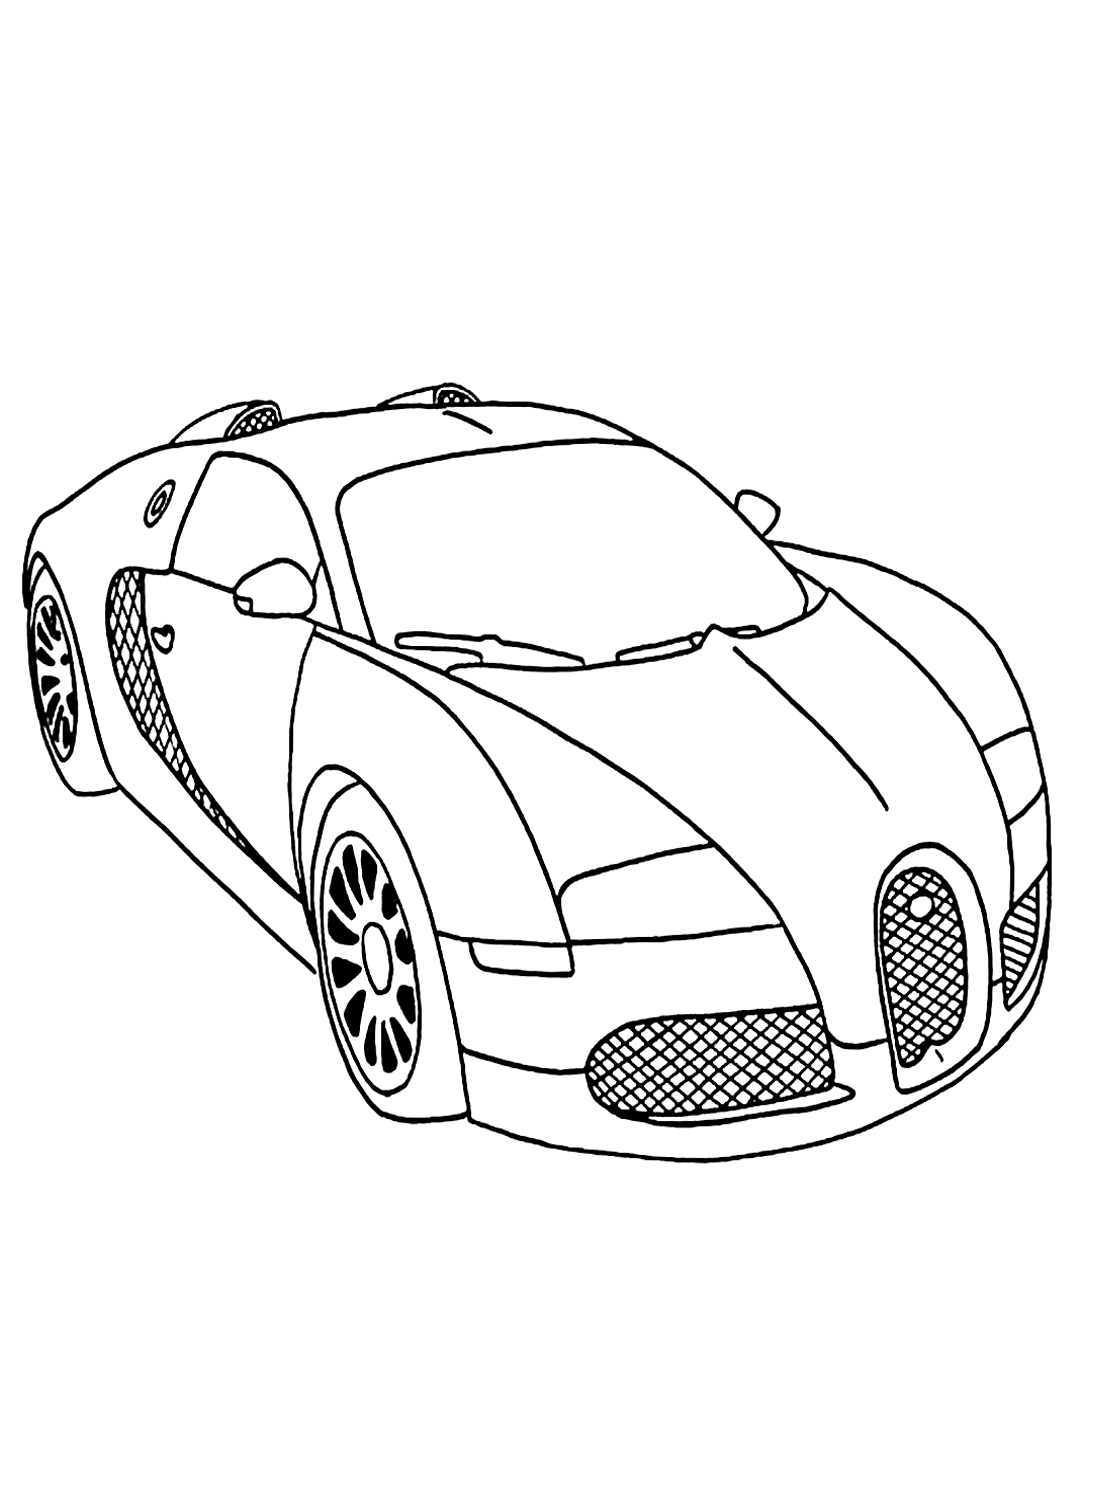 Racing Car Coloring Pages - Free Printable Coloring Pages